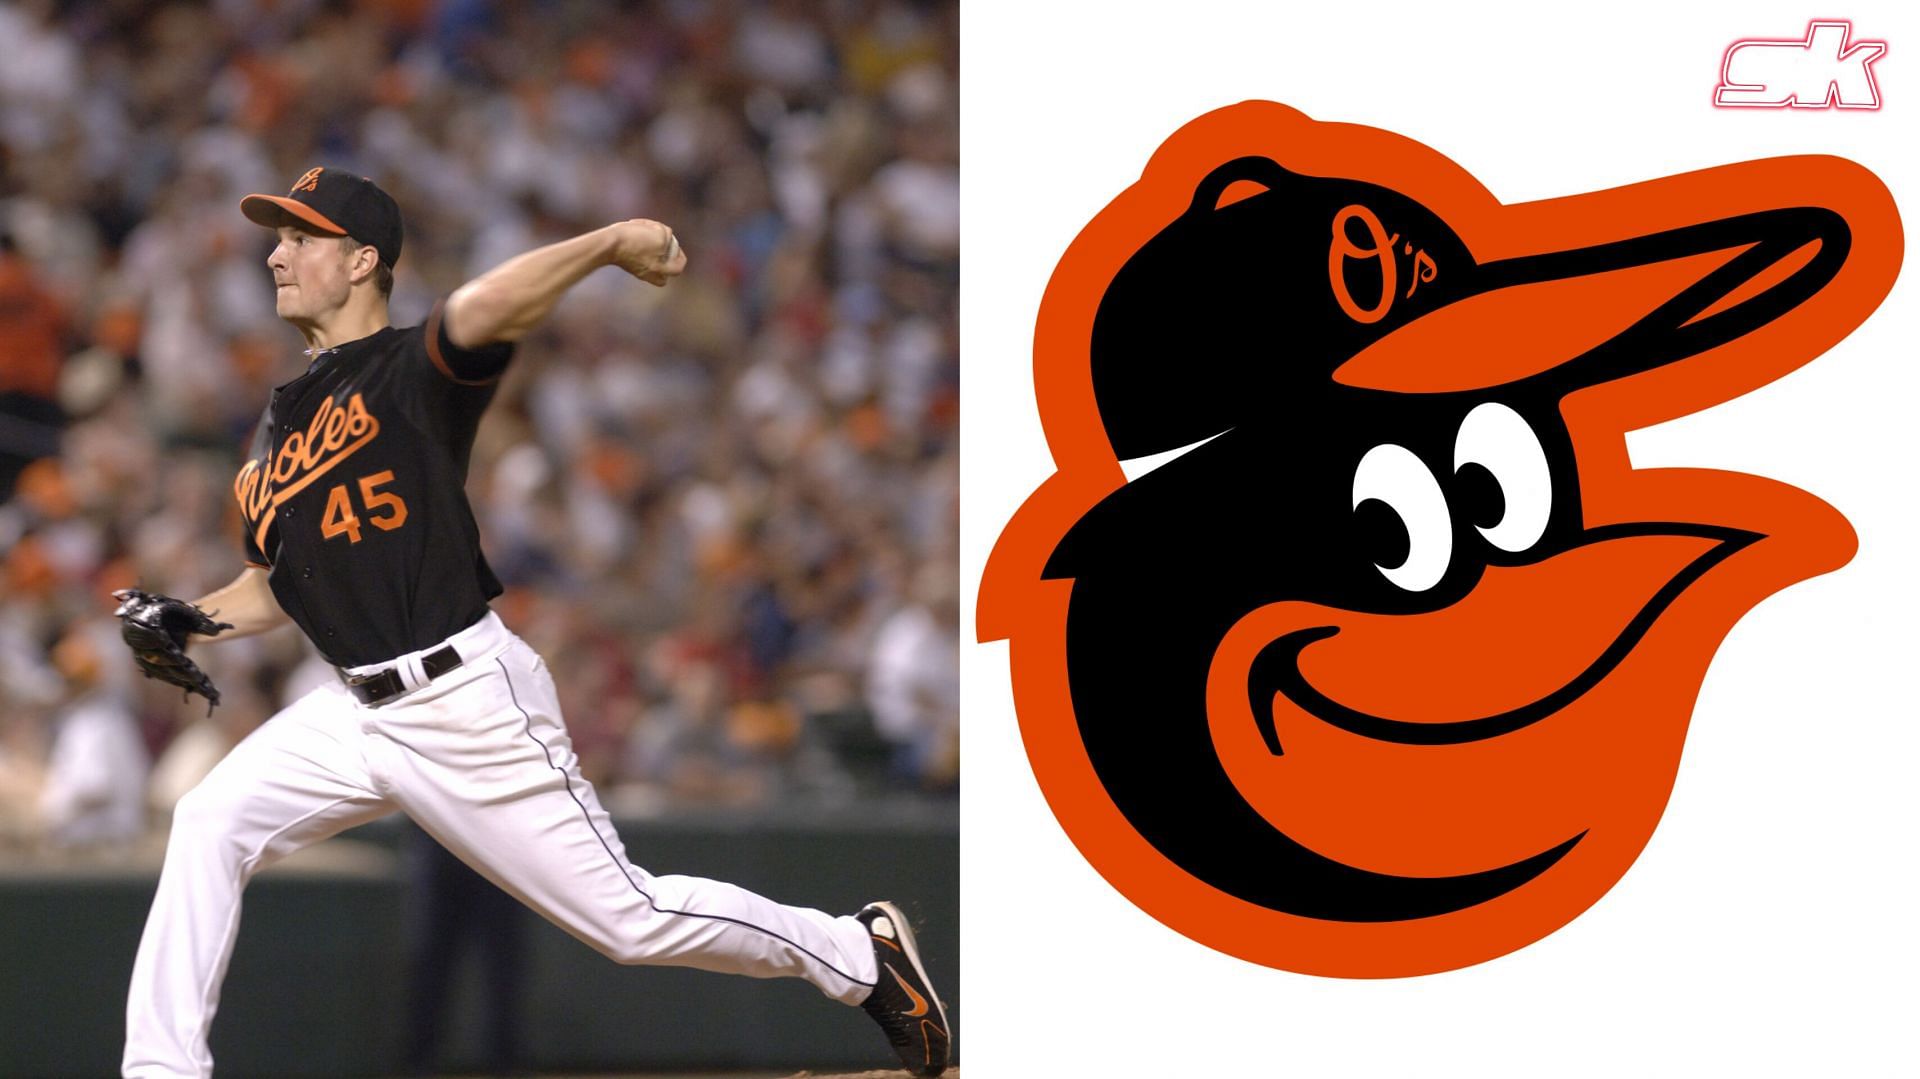 MLB Immaculate Grid Answers September 8 Baltimore Orioles players to have a 200+ K season